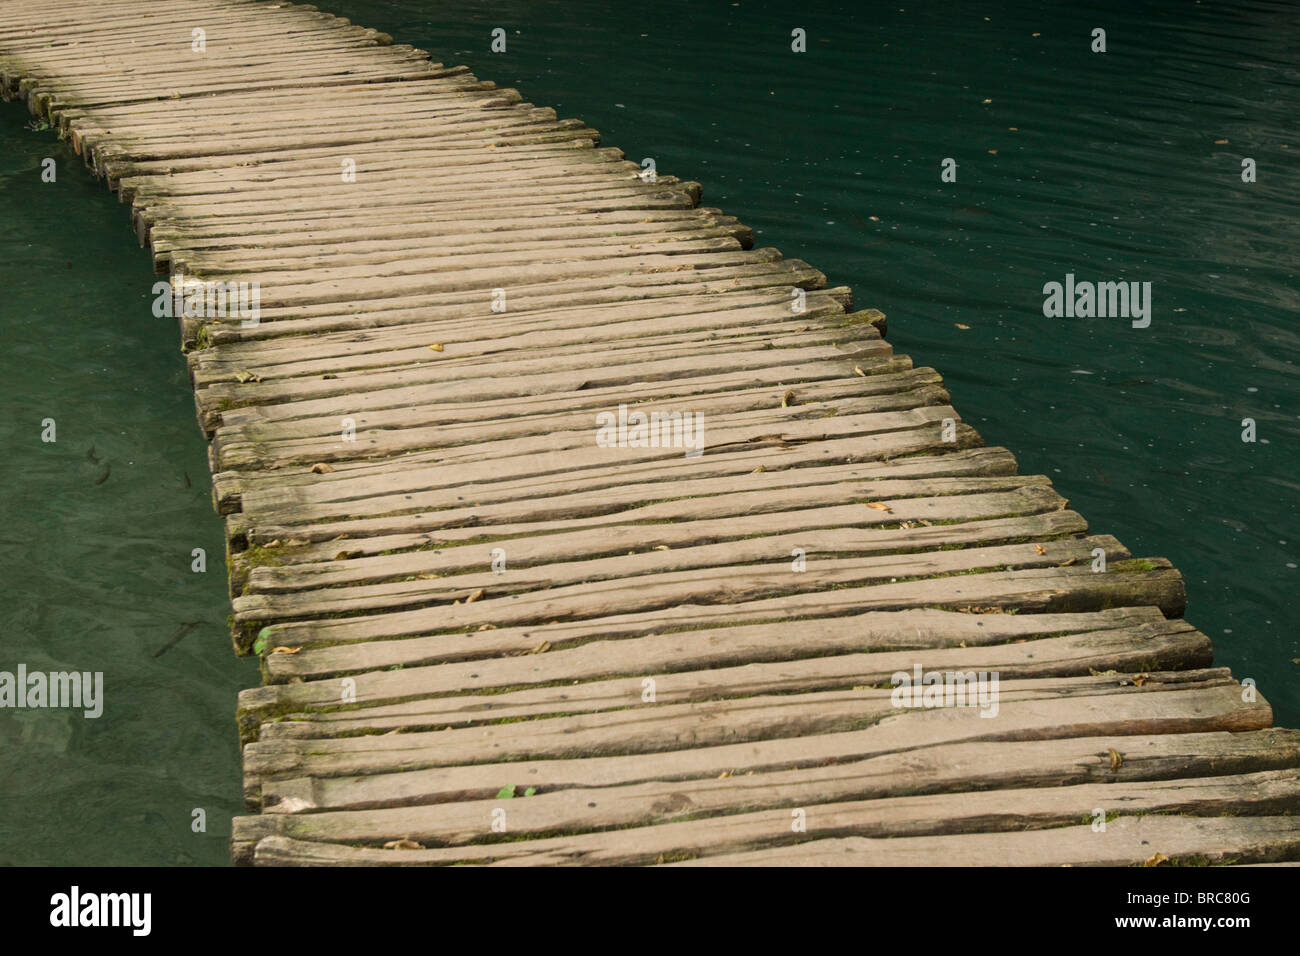 A wooden walkway in the Plitvice lakes in Croatia Stock Photo